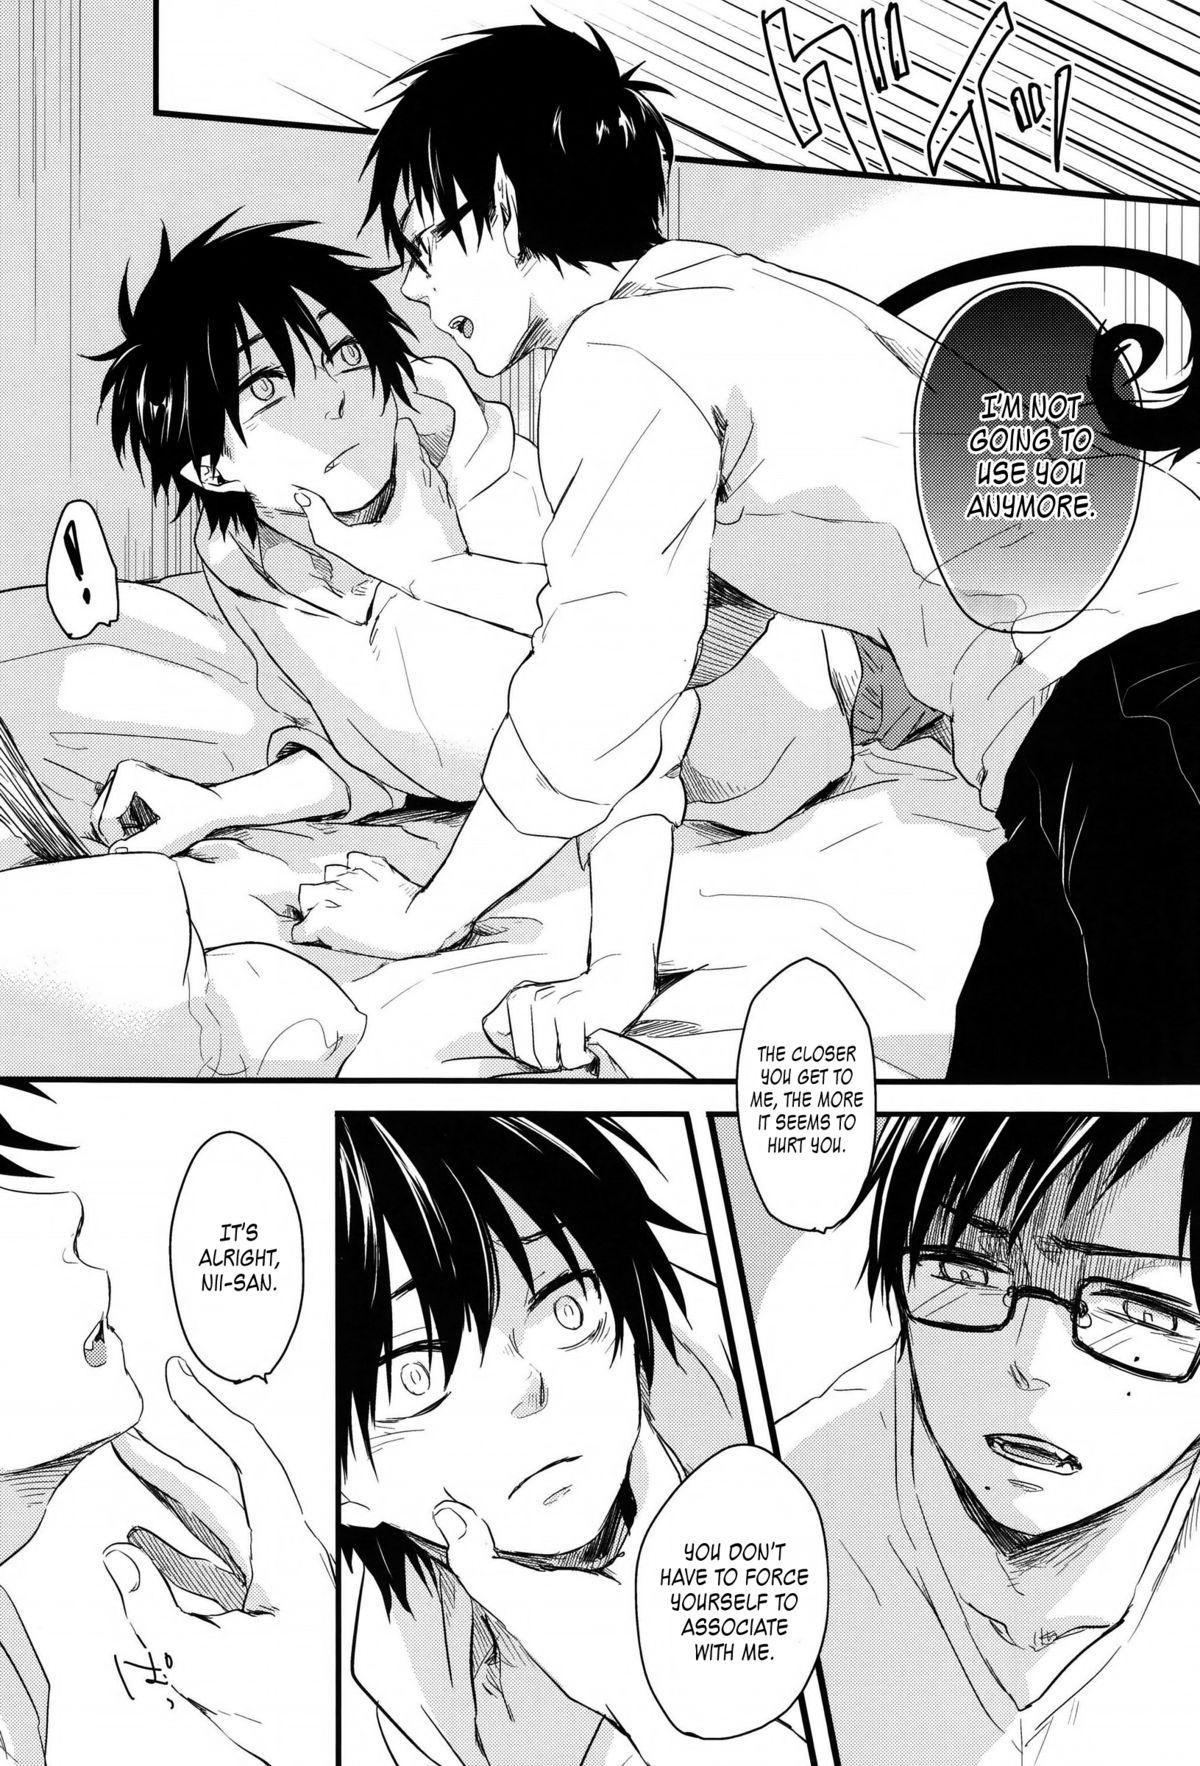 Cock My Life - Ao no exorcist 18yearsold - Page 12